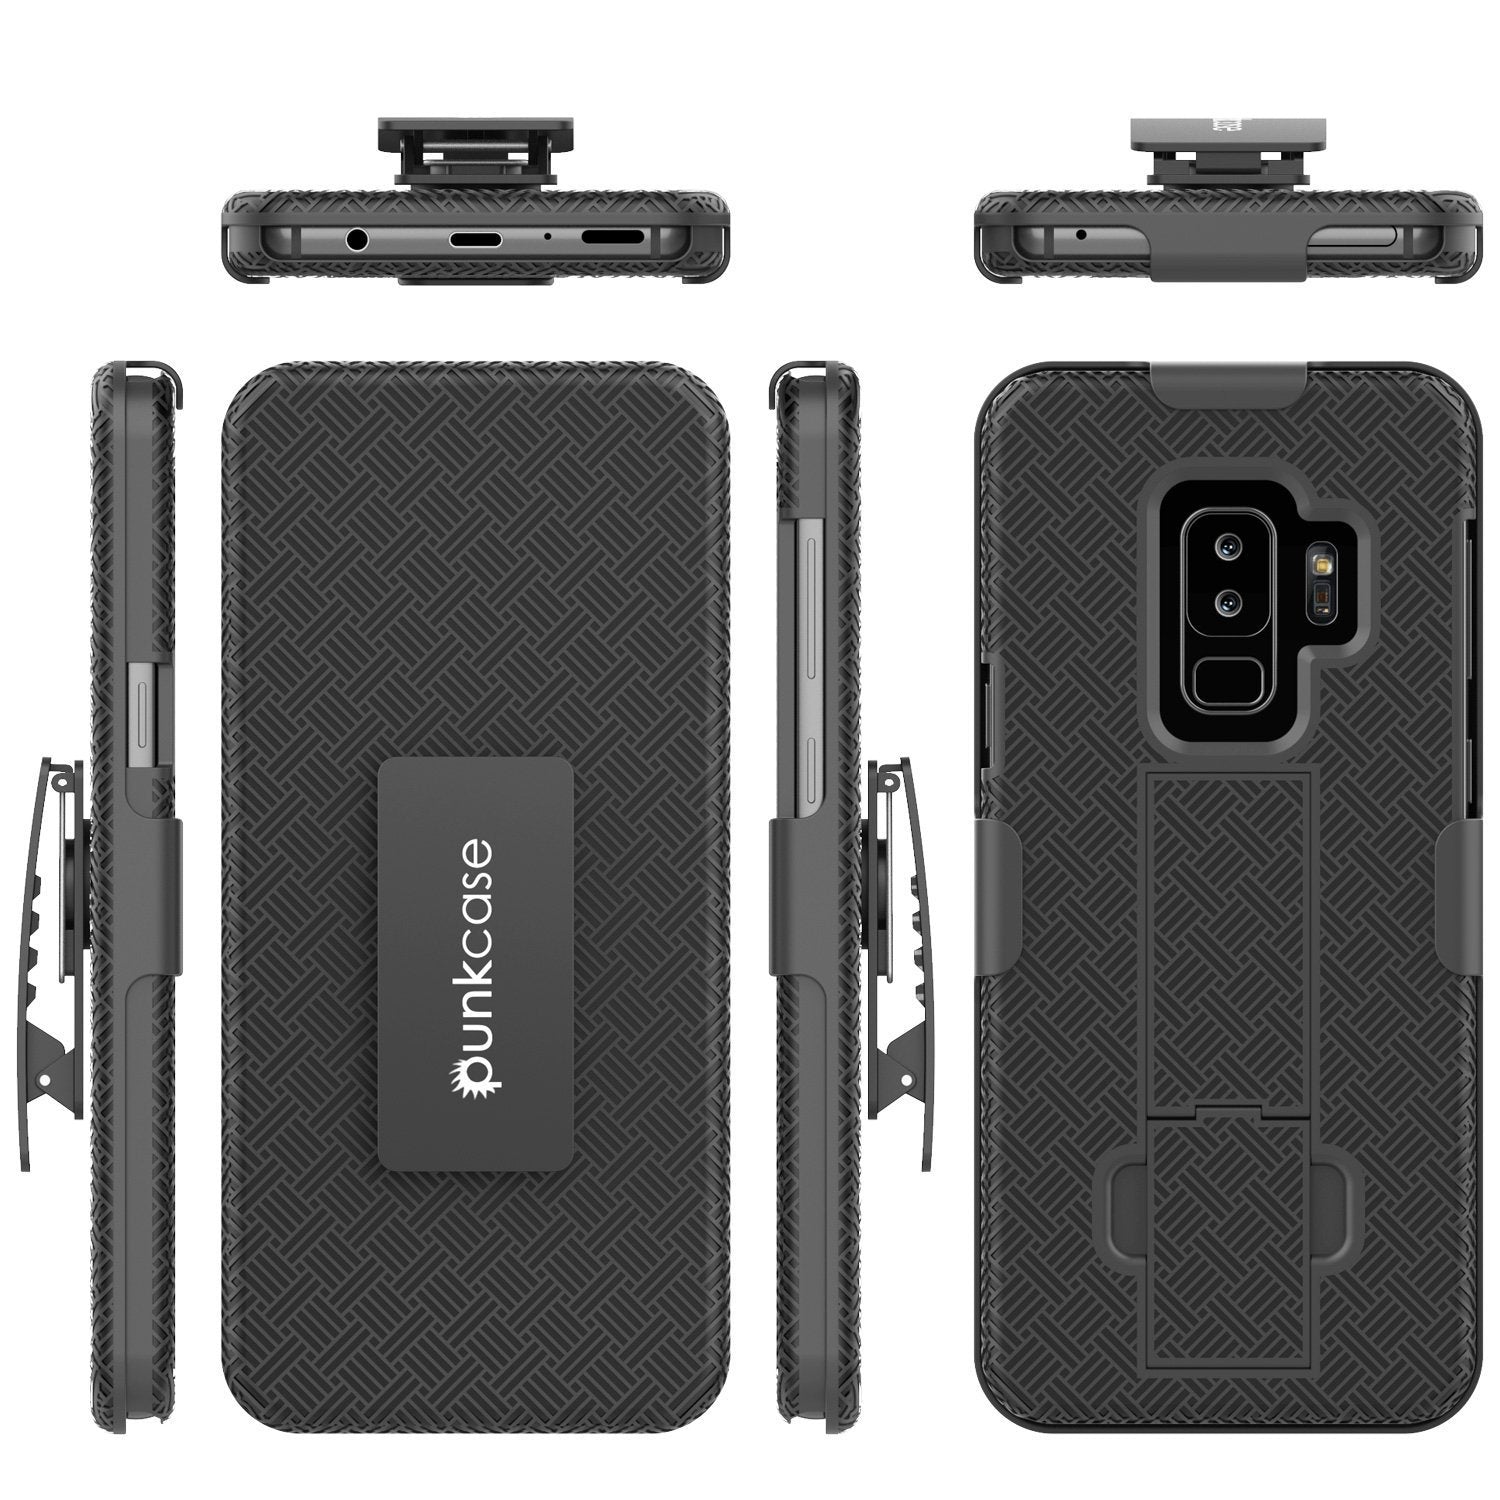 Punkcase Galaxy S9 PLUS Case With Screen Protector, Holster Belt Clip & Built-In Kickstand Non Slip Dual Layer Hybrid TPU Full Body Protection [Thin Fit] for Samsung Galaxy S9+ Edge [Black]